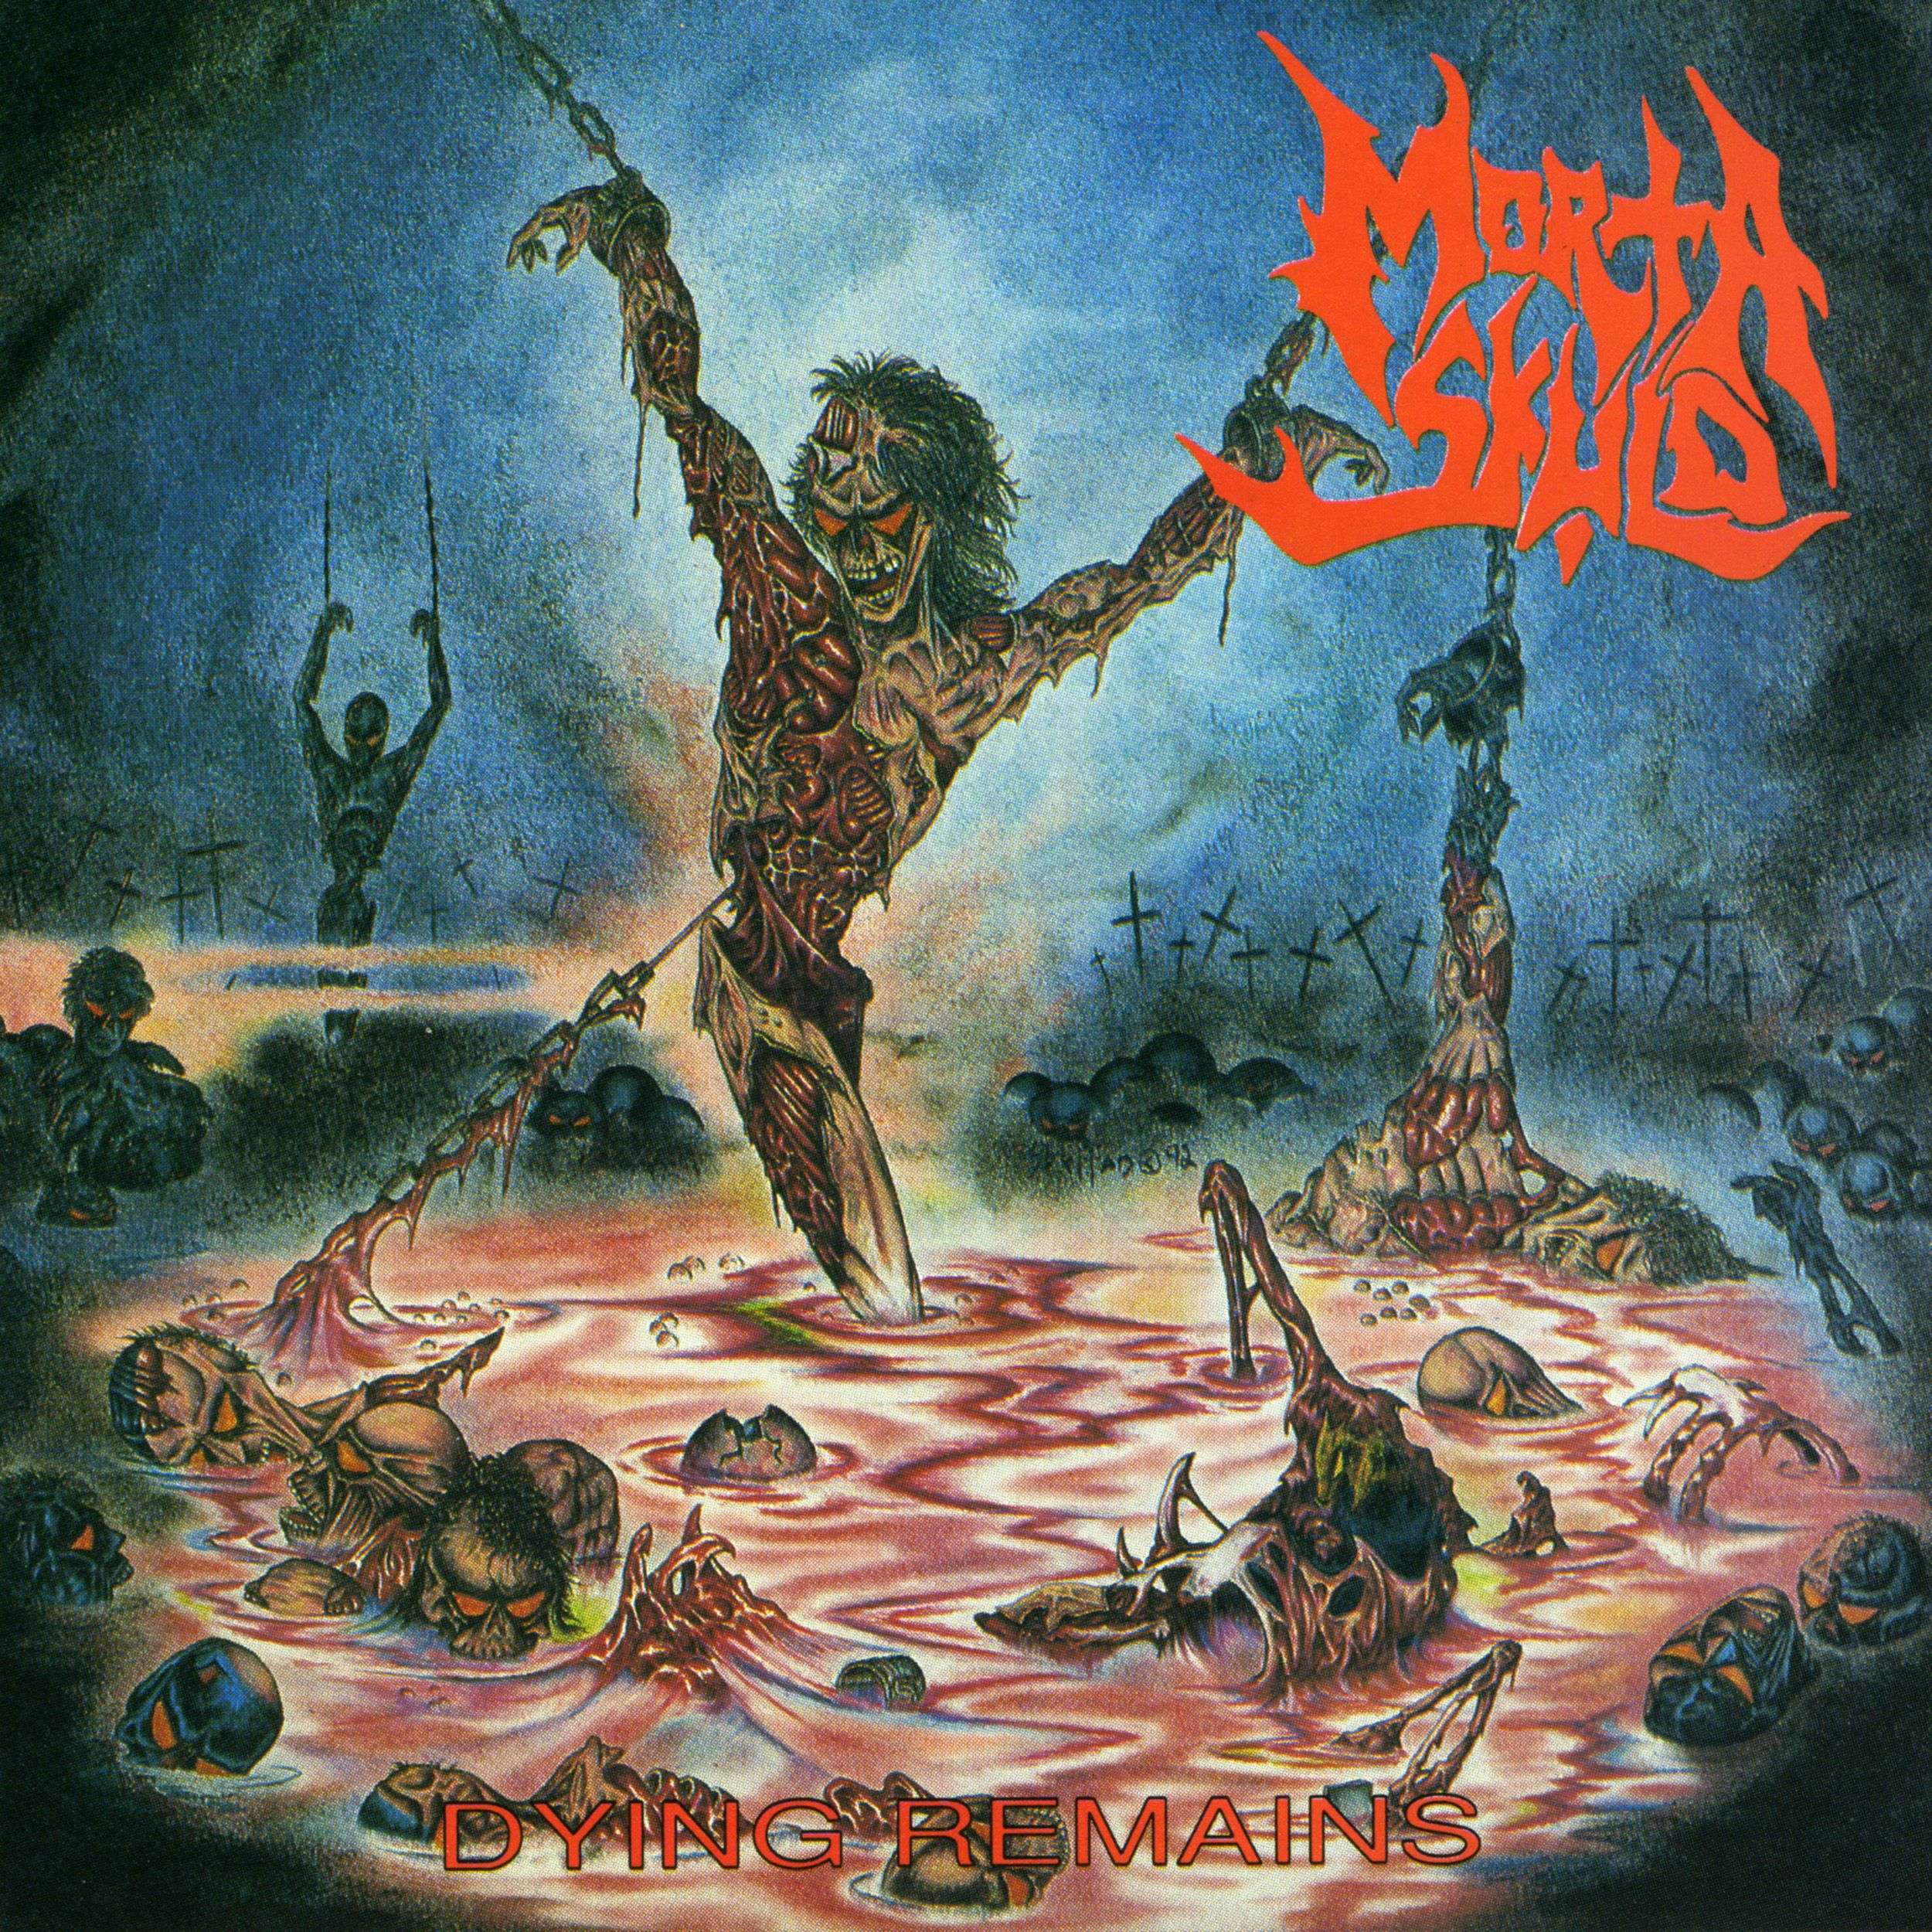 MORTA SKULD are back and stronger than ever!